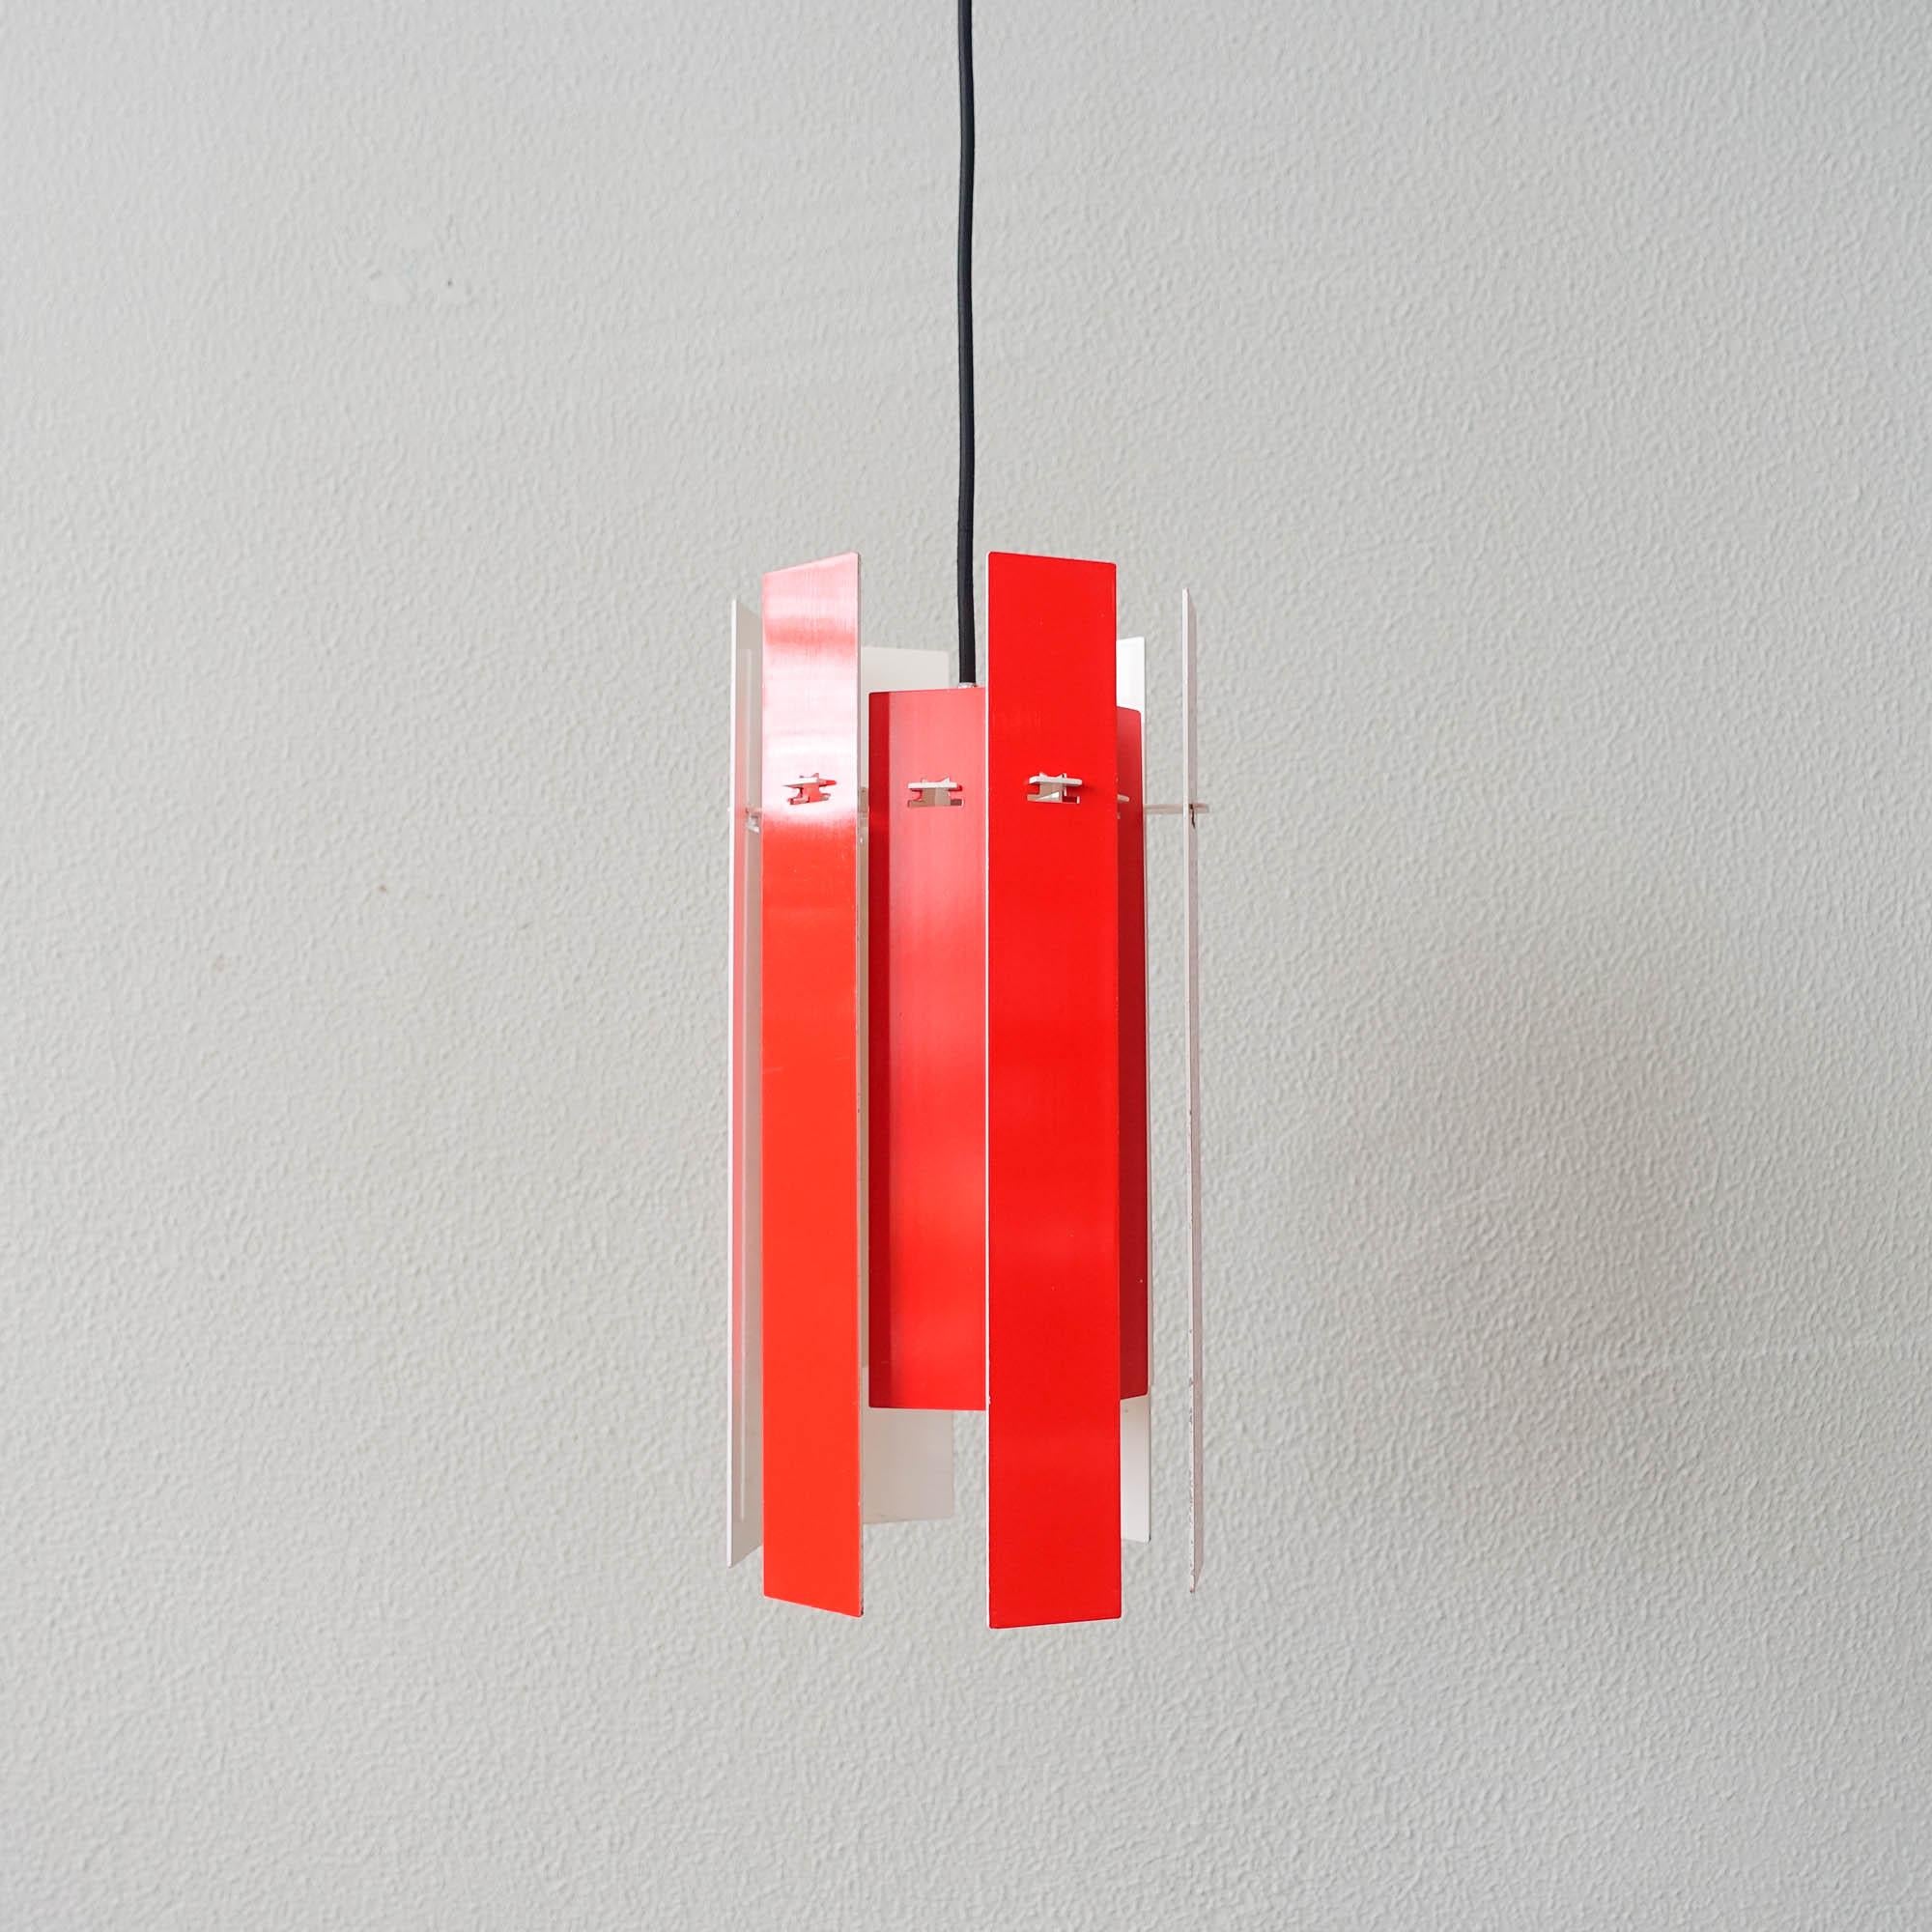 This pendant lamp, model Cocktail, was designed by Henning Rehhof in 1970 for Fog & Mørup, Denmark. The lamp has twelve metal strips, six longer ones and six shorter painted red on one side and white on the other. The strips are hung for a circular